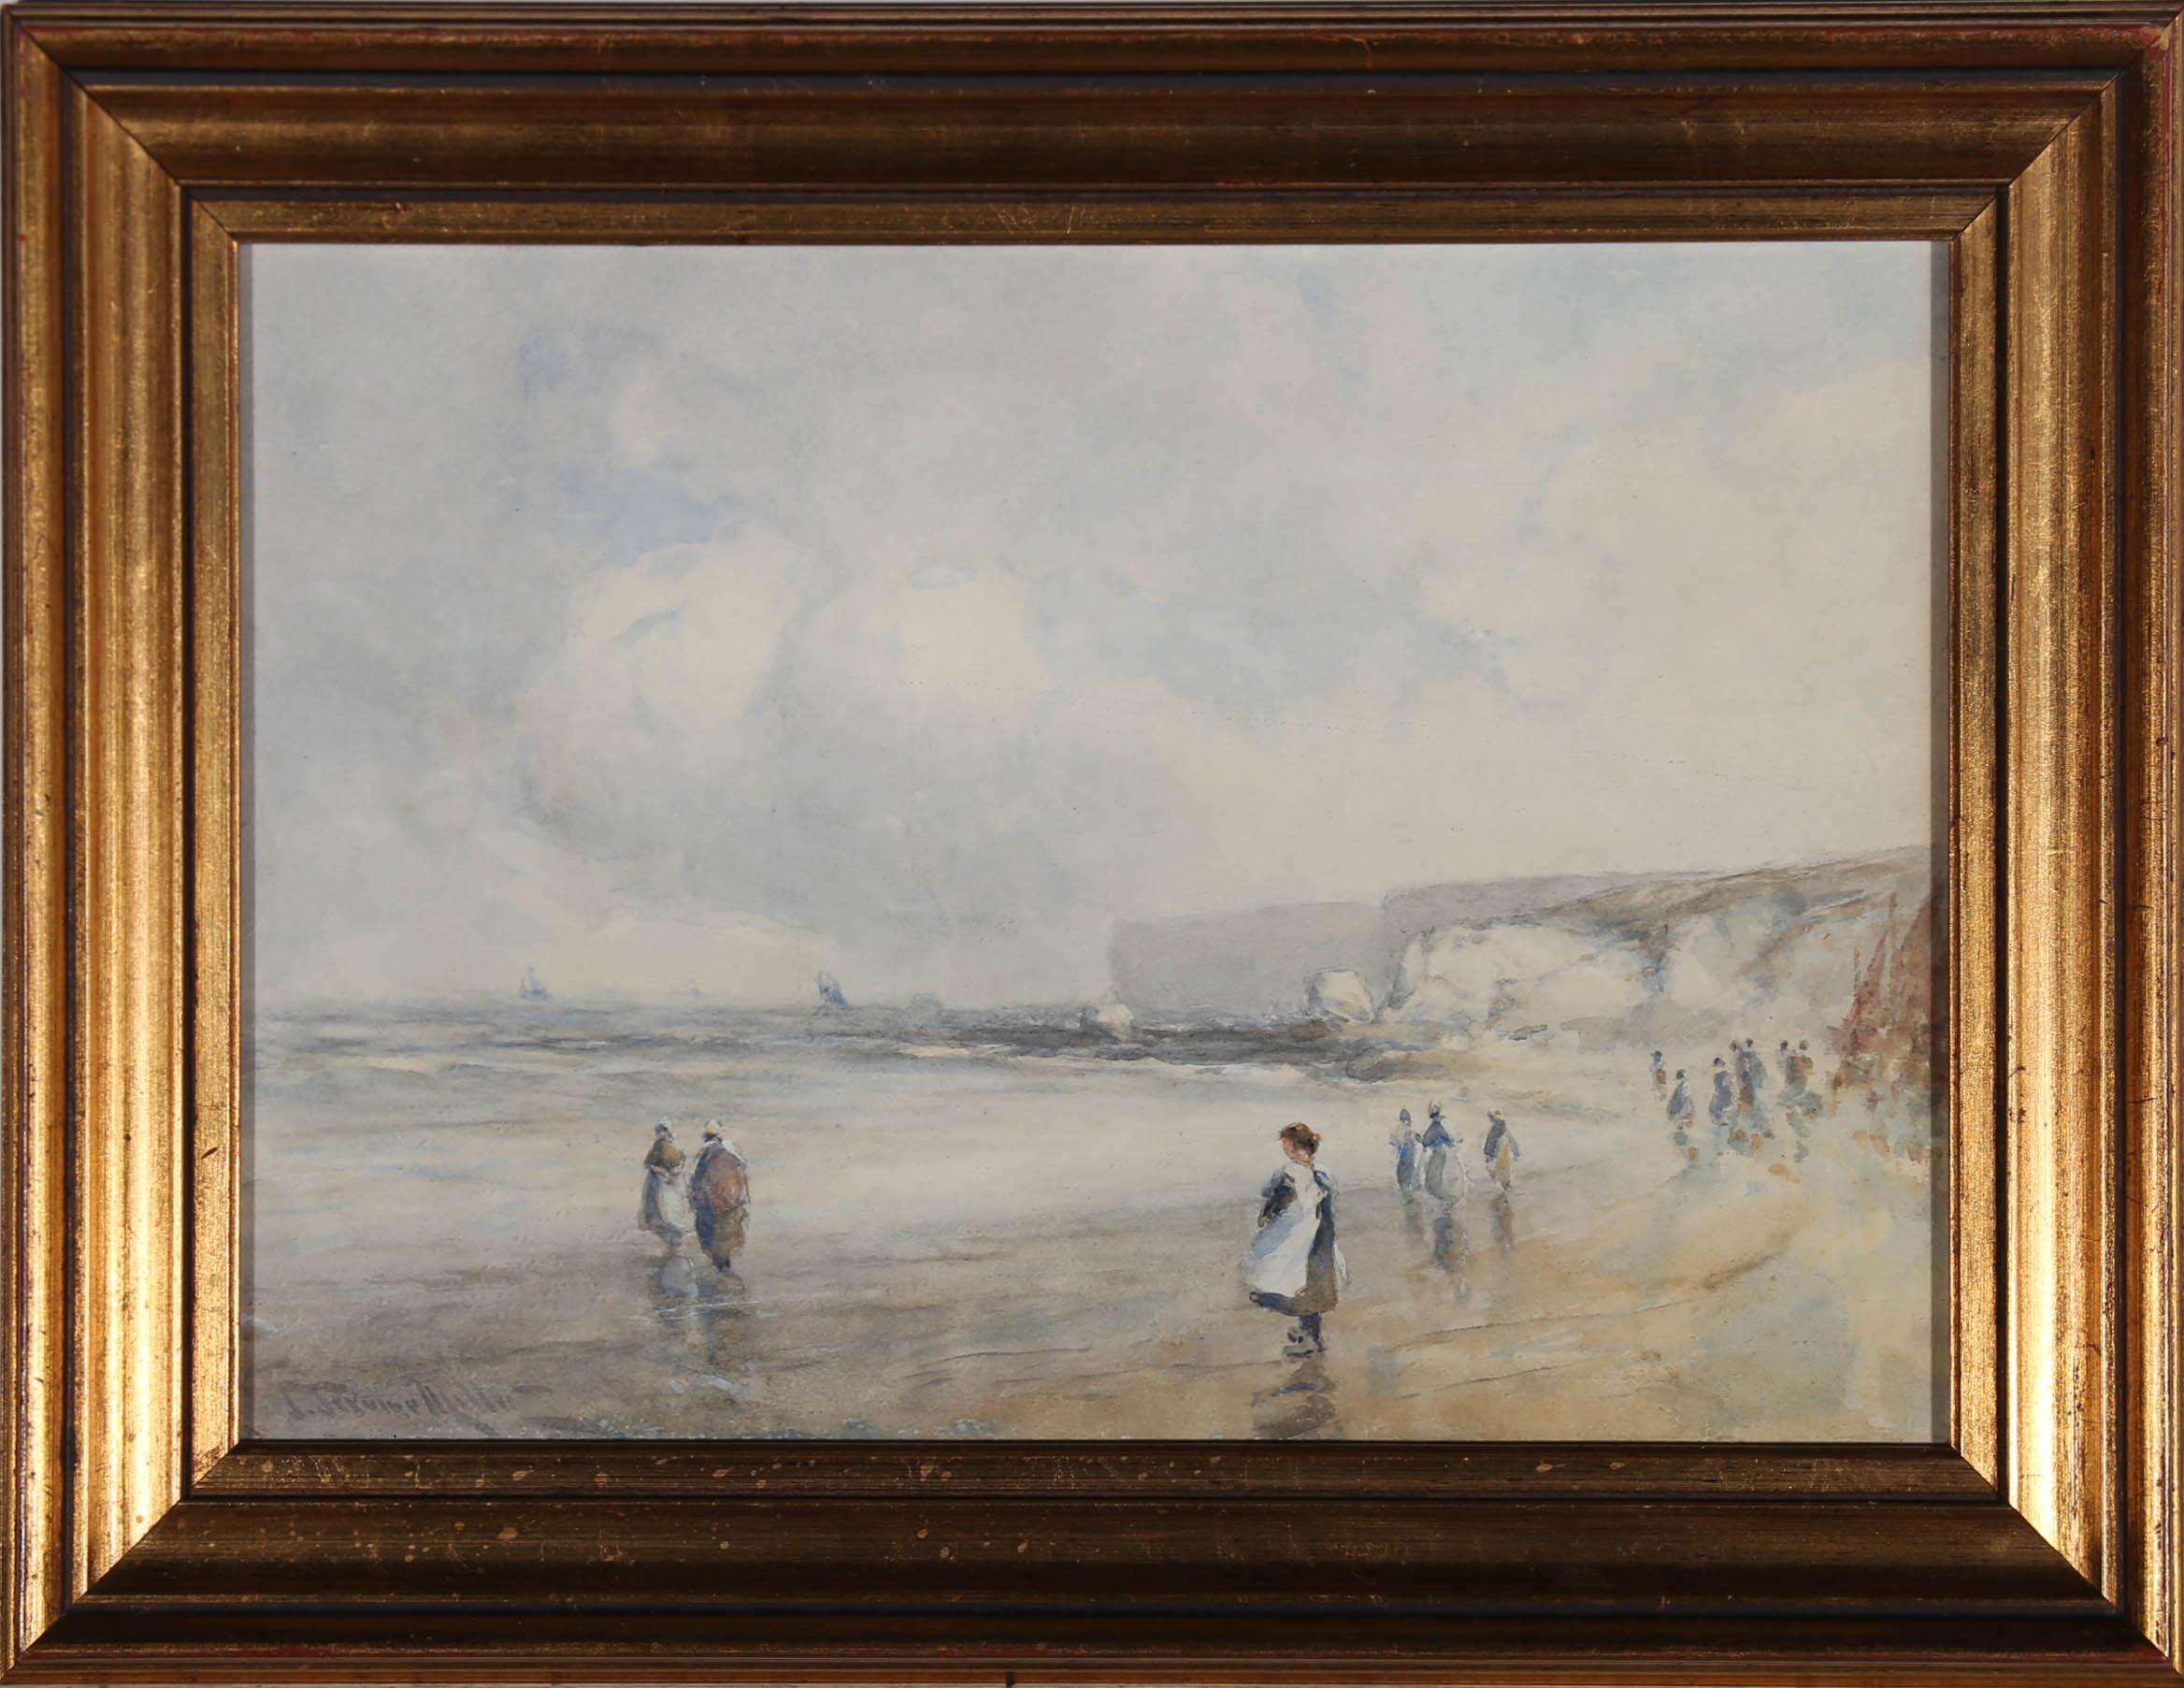 This accomplished watercolour scene depicts fisherfolk waiting on the shoreline for boats to come in. Fishwives wear long shawls and aprons that blow in the strong winds as they look out to sea. The artist perfectly captures the atmosphere of a